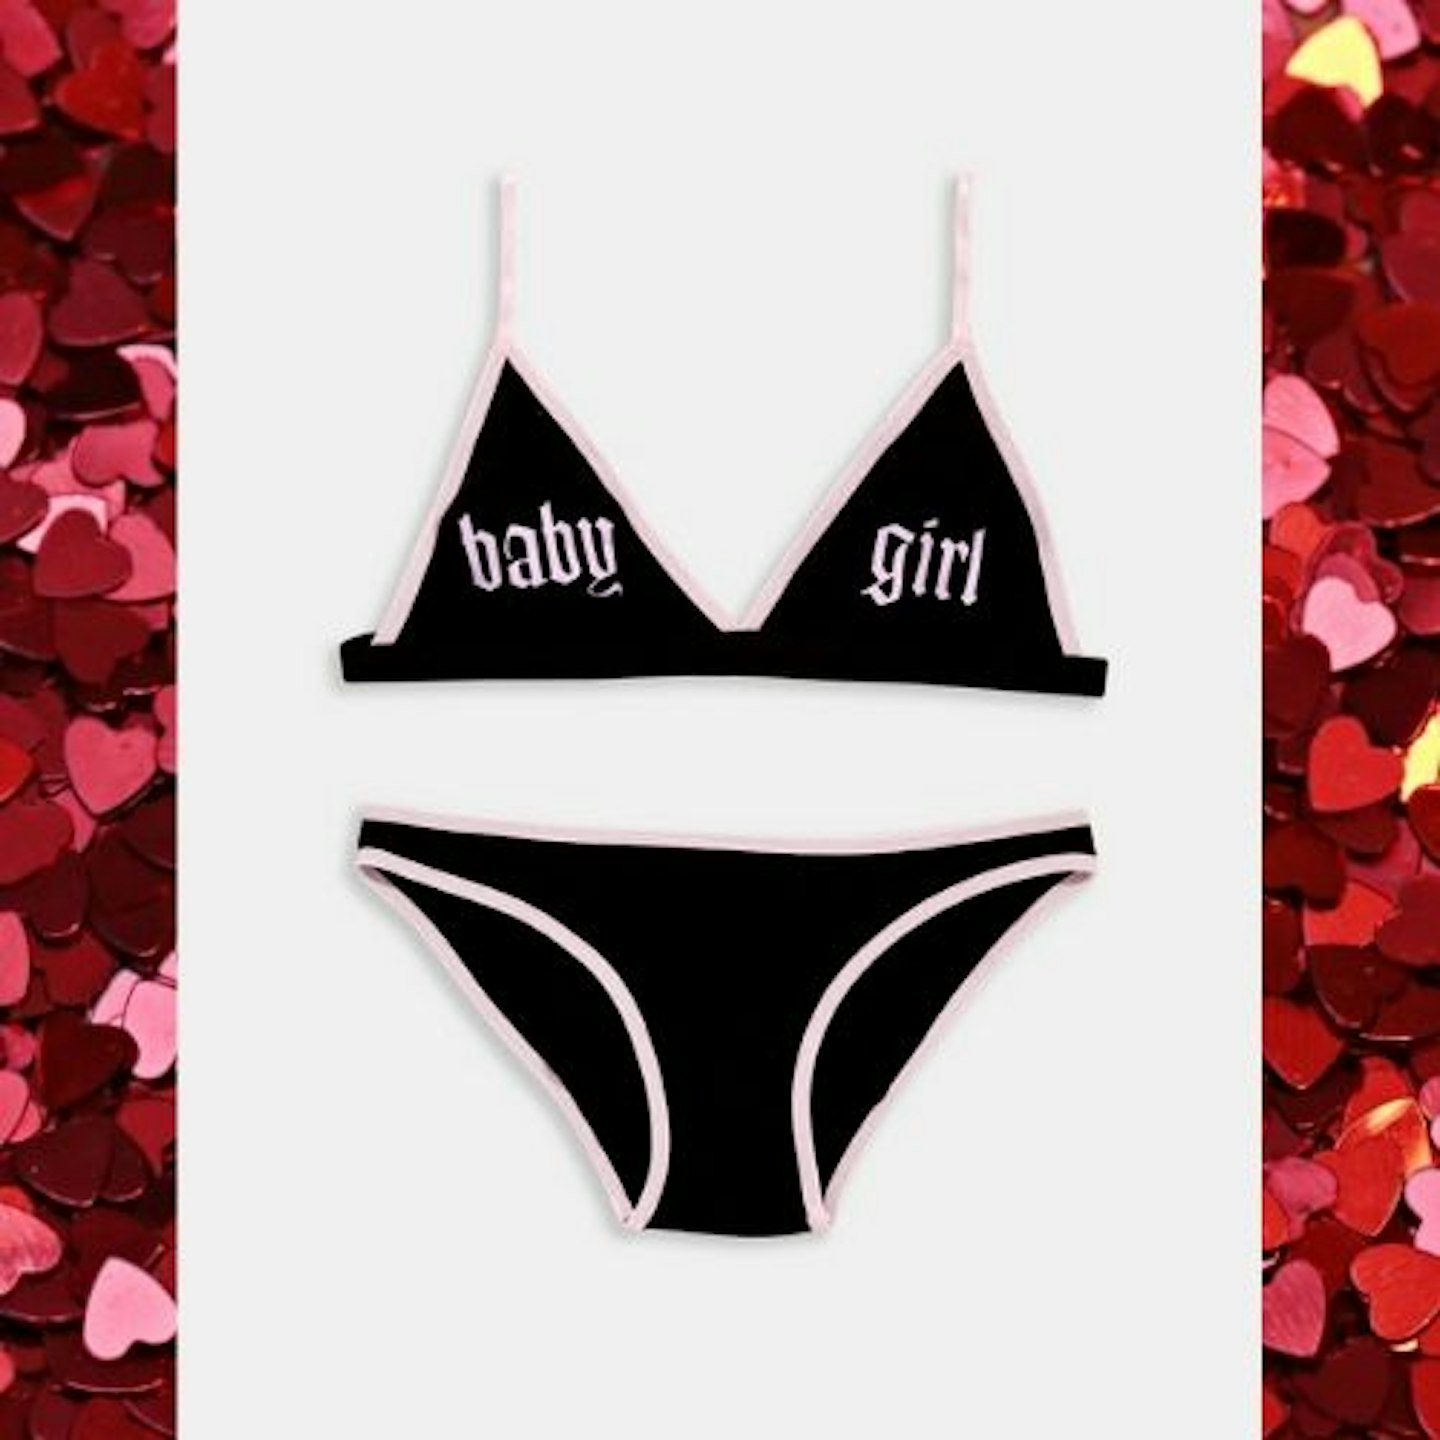 Baby girl bralette and knickers